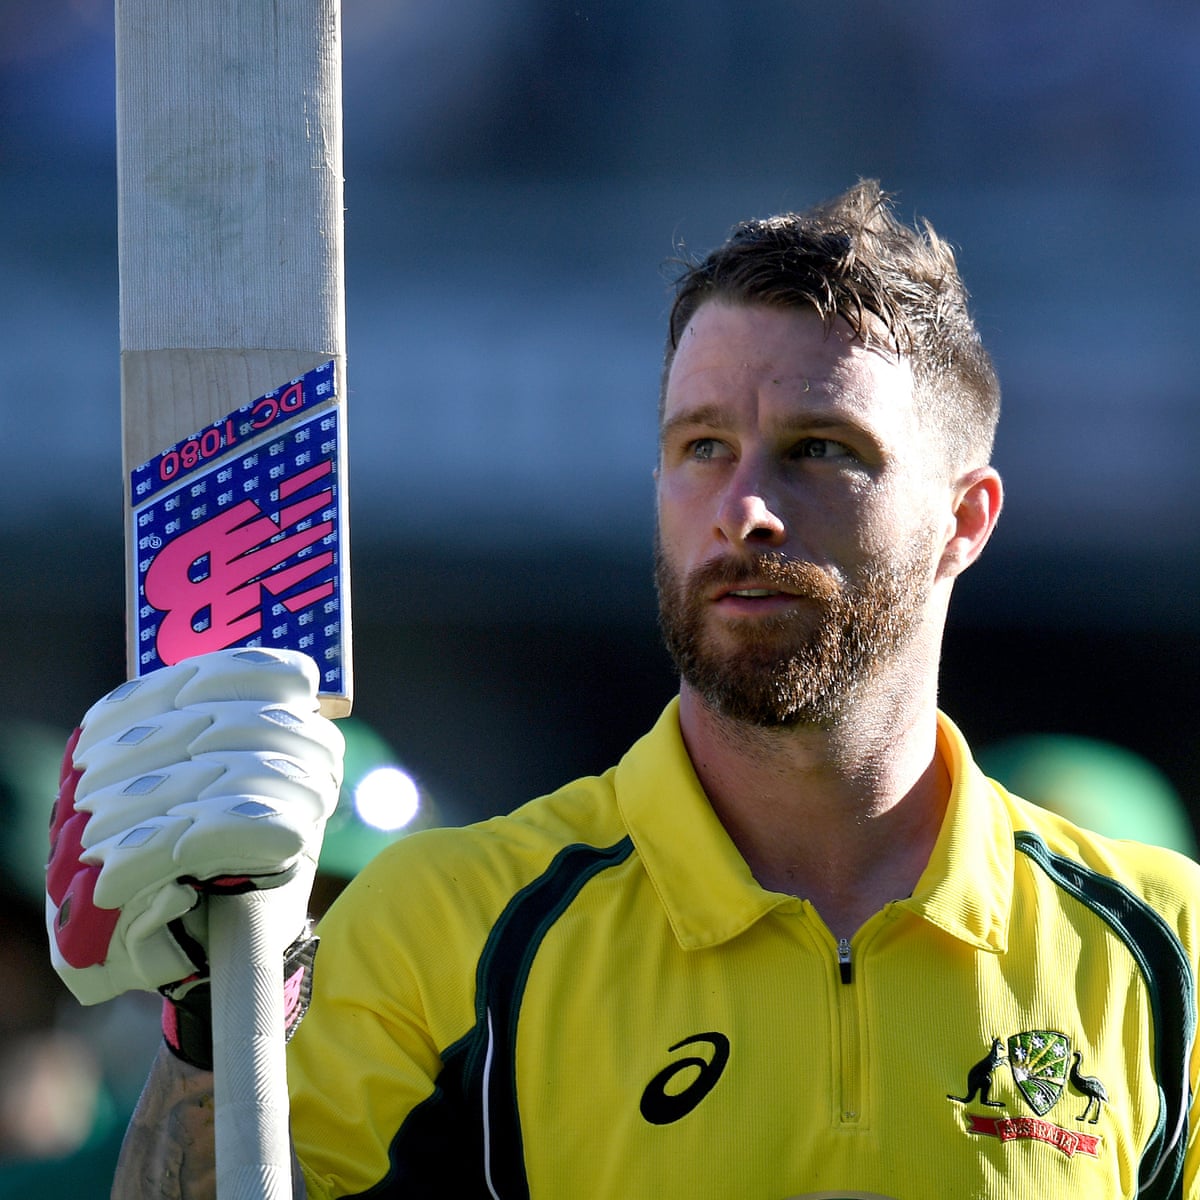 Matthew Wade says "Glenn Maxwell at the other end heard the noise" in T20 World cup 2021